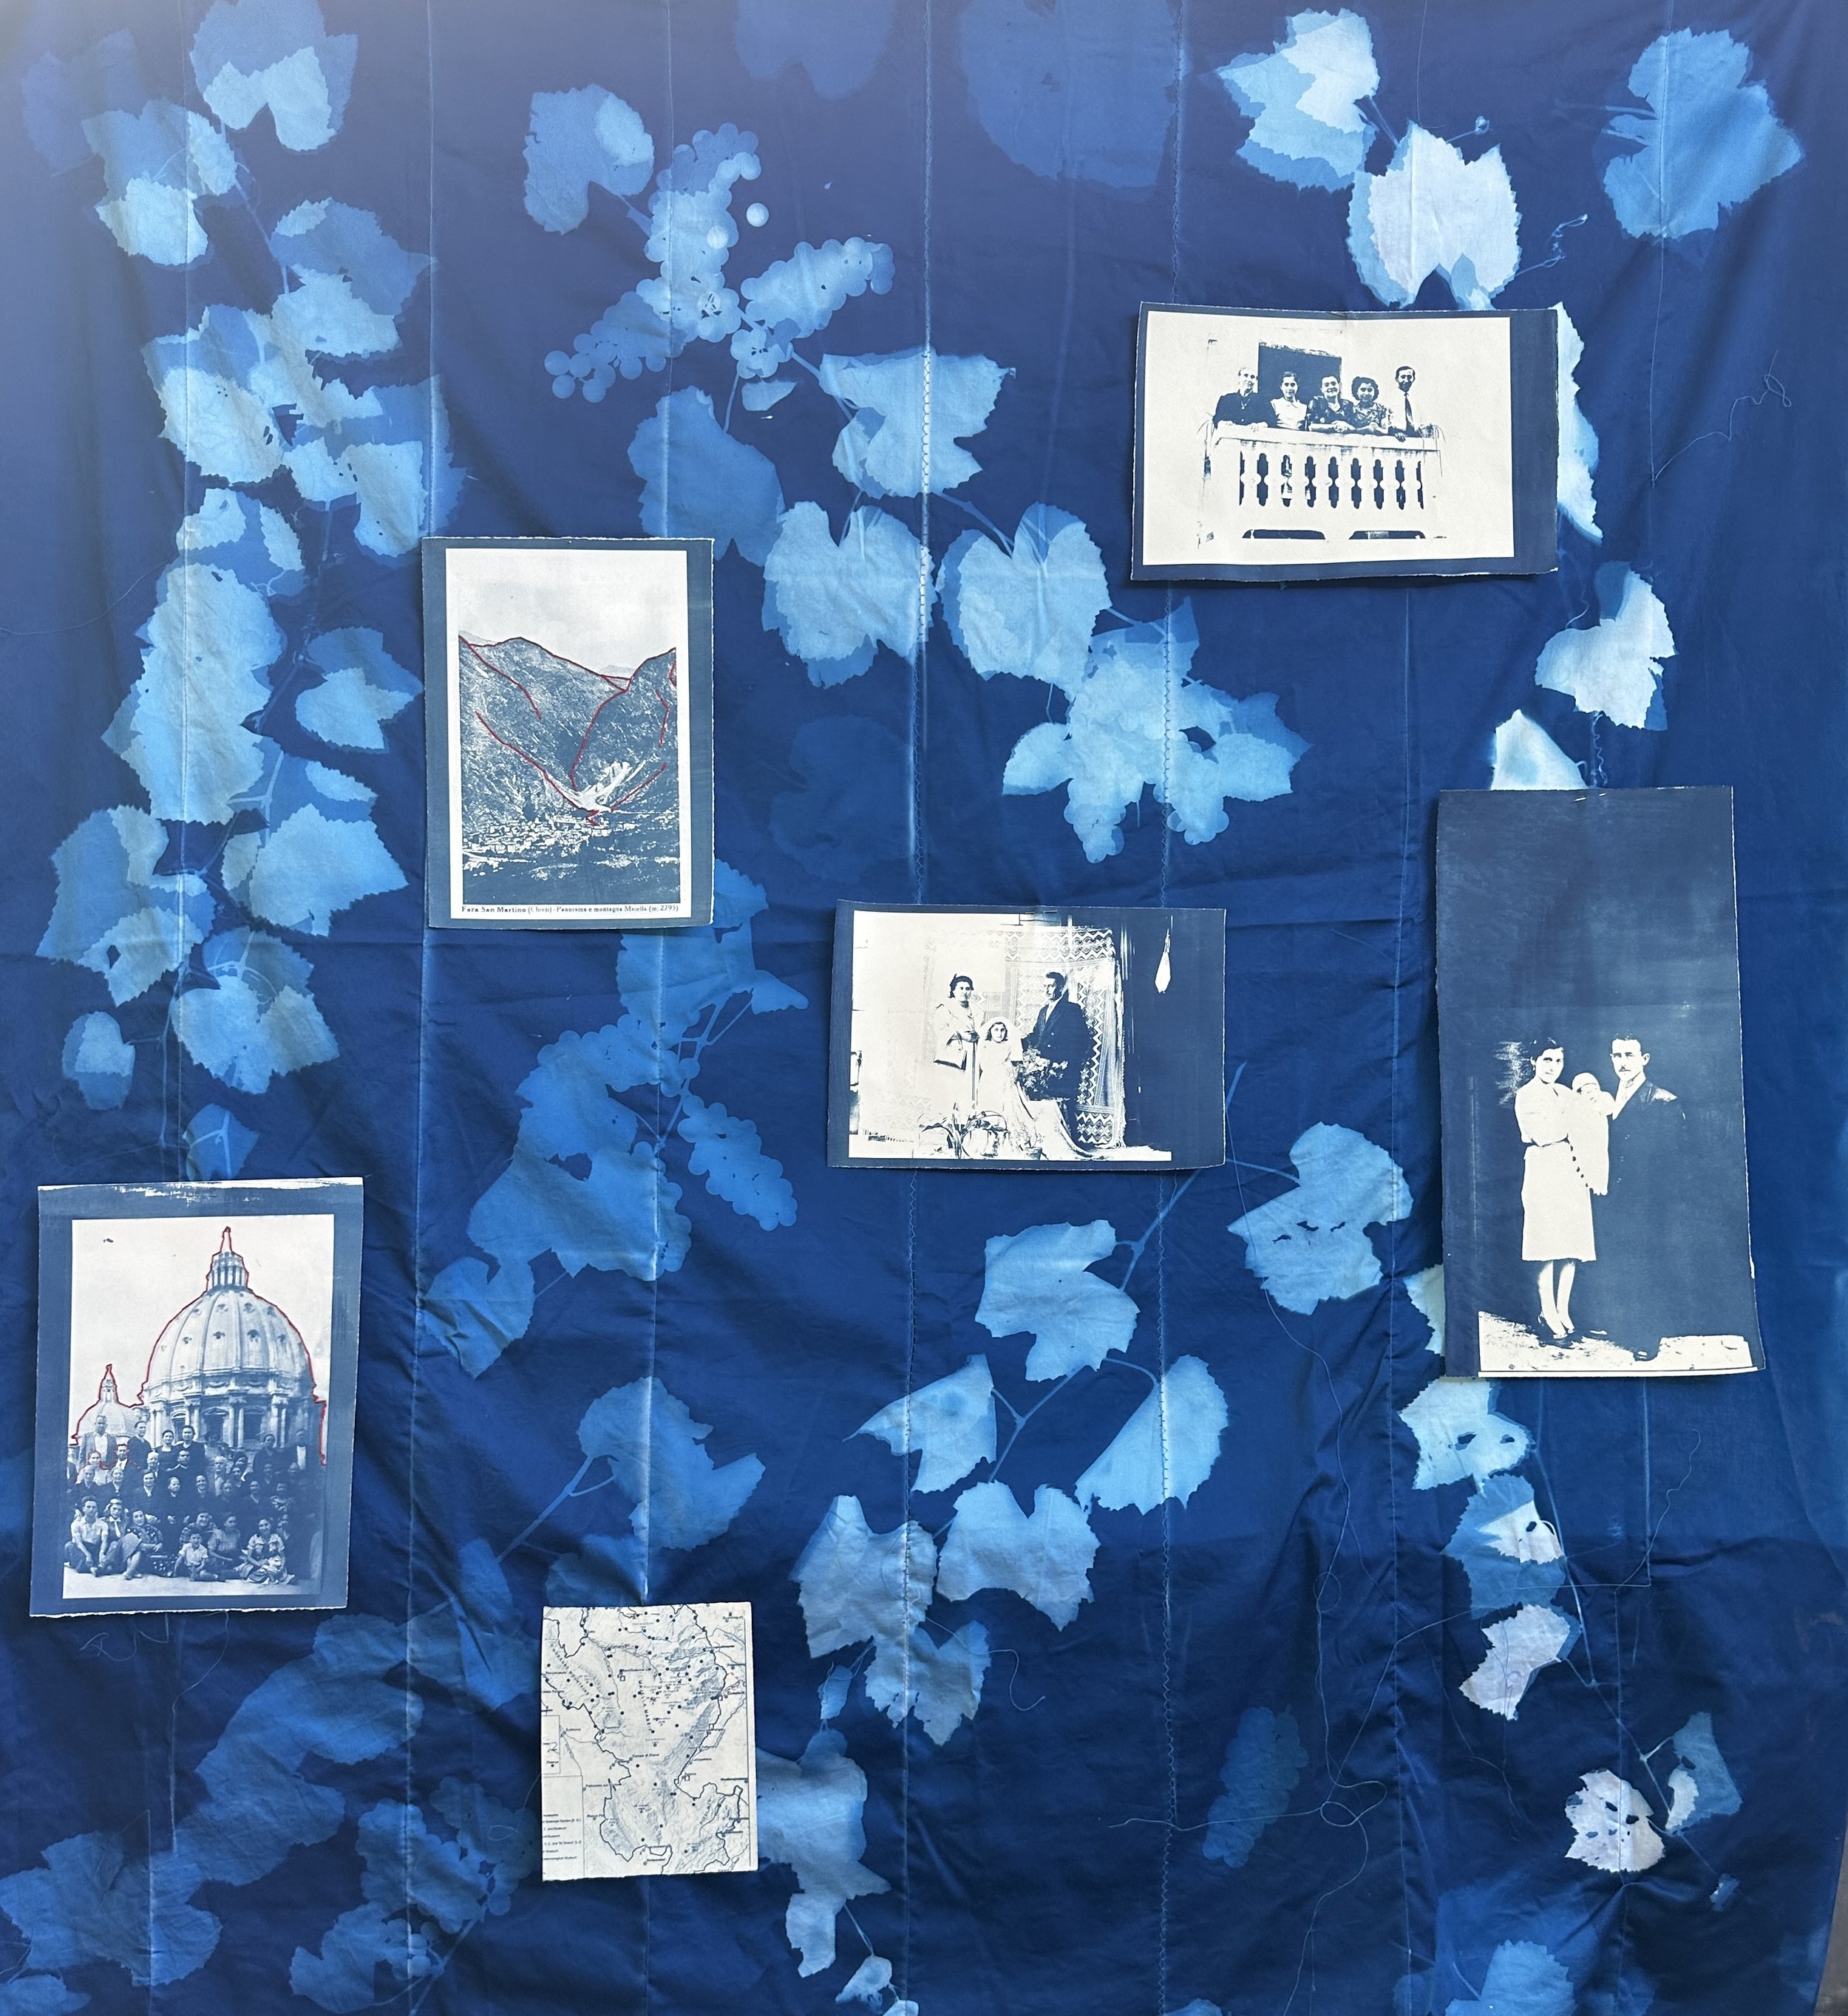 Life Images by Jill: Experimenting with wet cyanotype